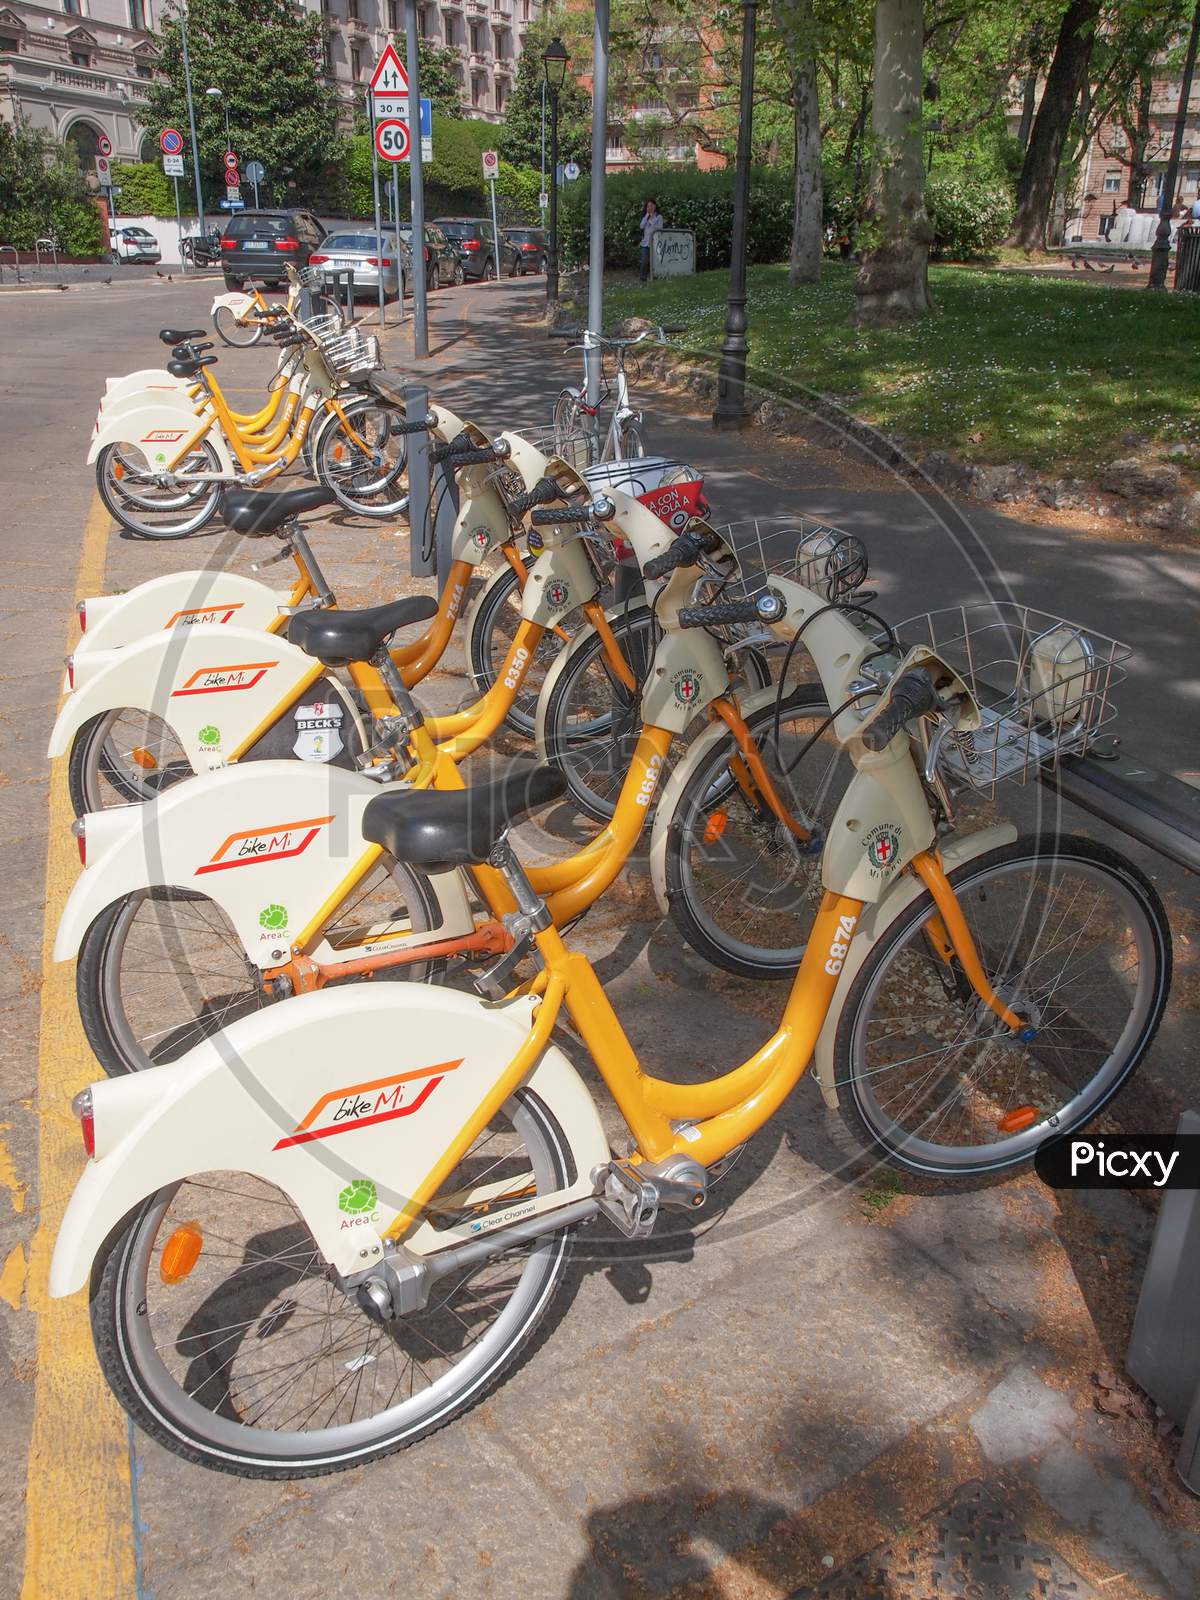 Milan, Italy - April 10, 2014: A Docking Station For The Cycle Hire Network